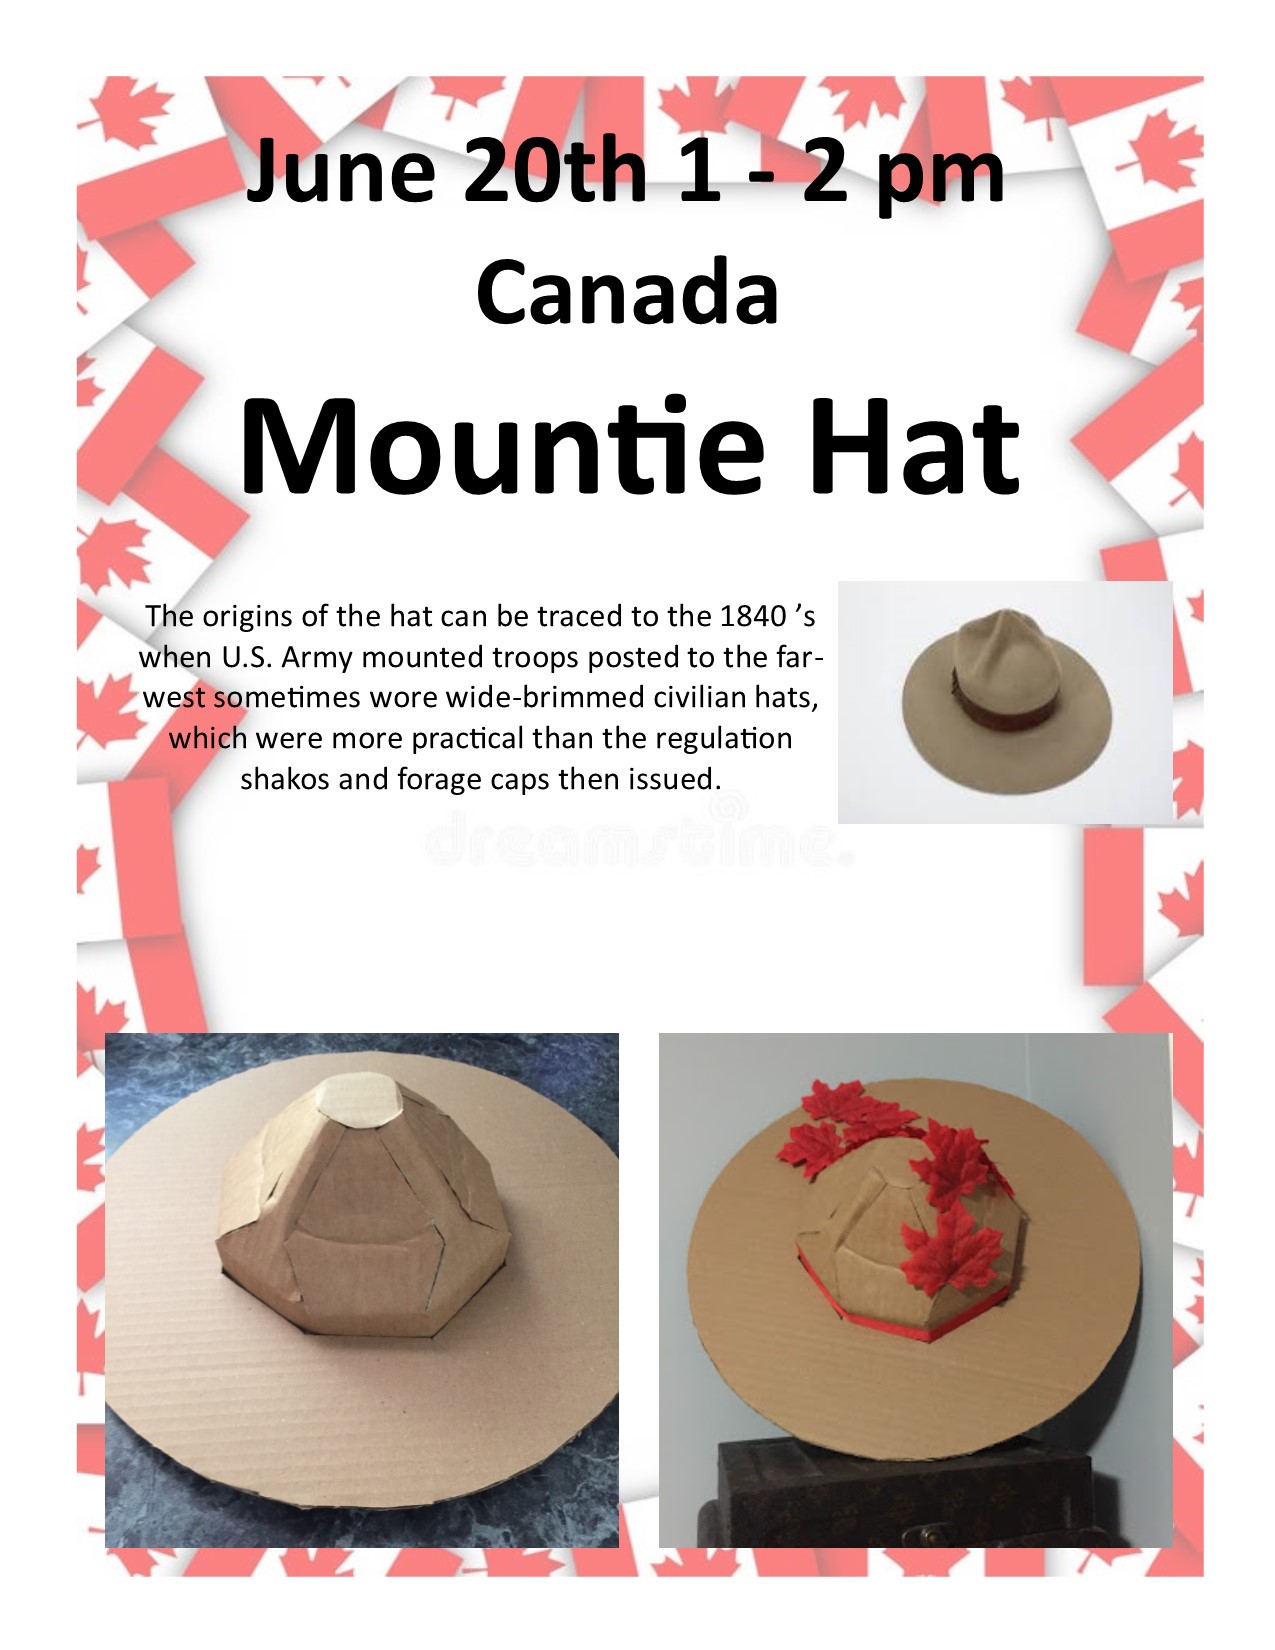 Canadian Mountie Hat